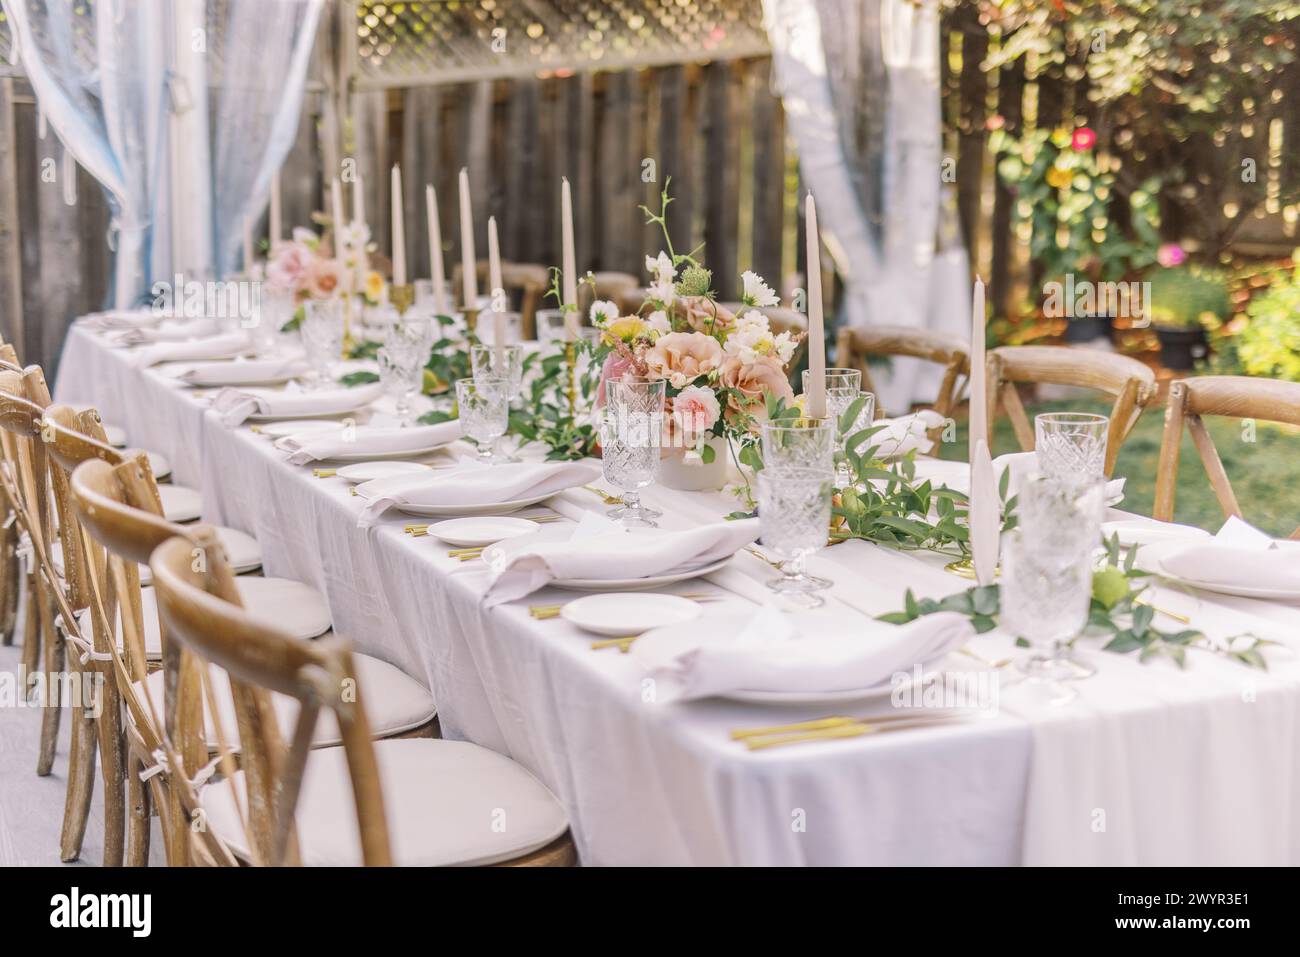 Chic garden wedding table with floral centerpiece Stock Photo